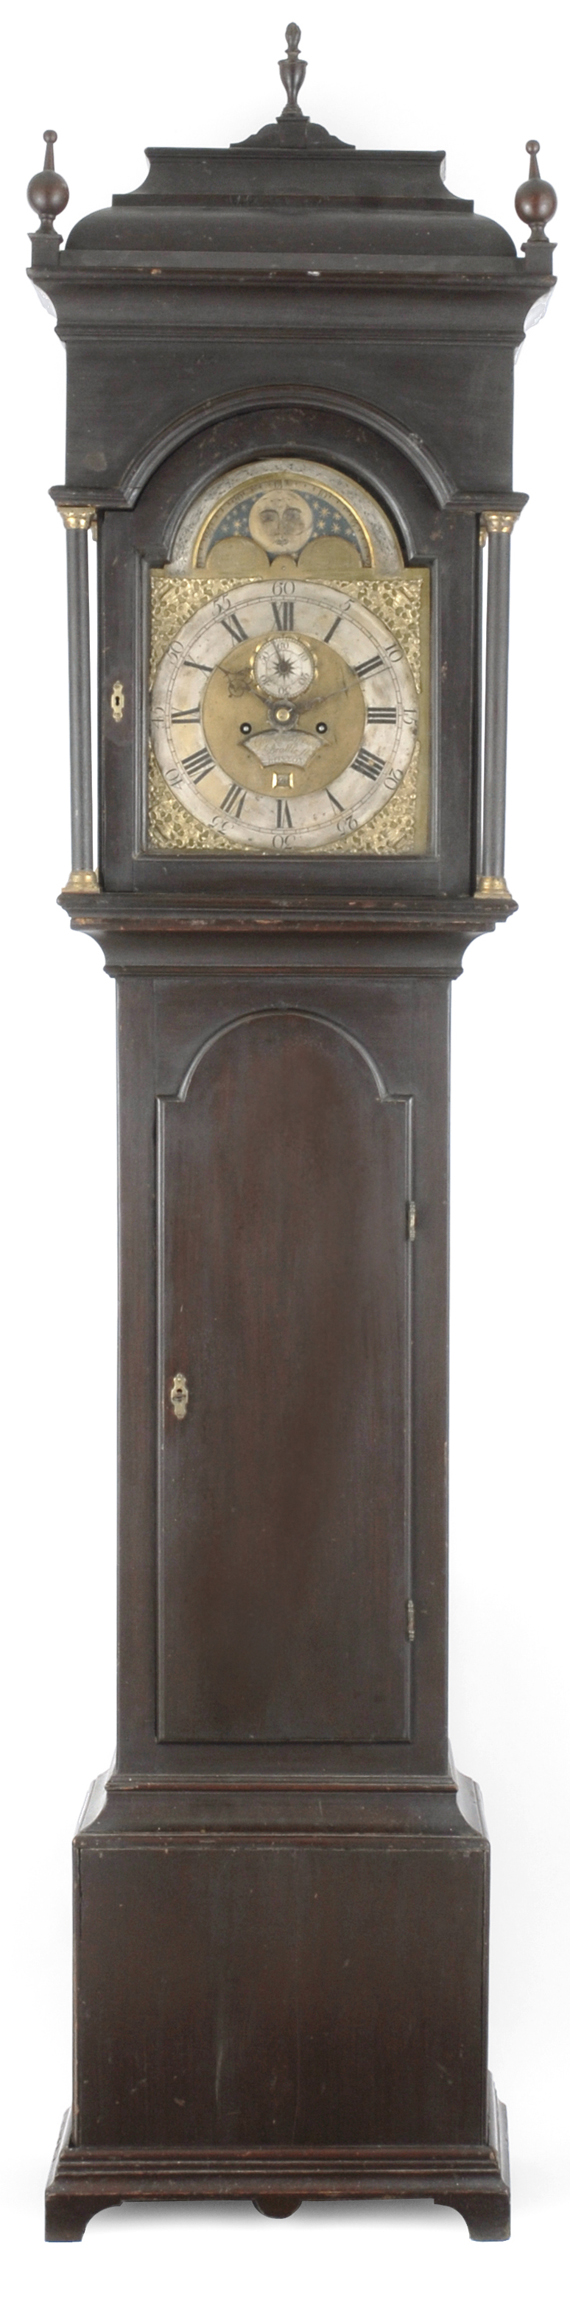 An important Chippendale mahogany tall case clock, By Gawen Brown, Boston, Massachusetts, Circa 1760.